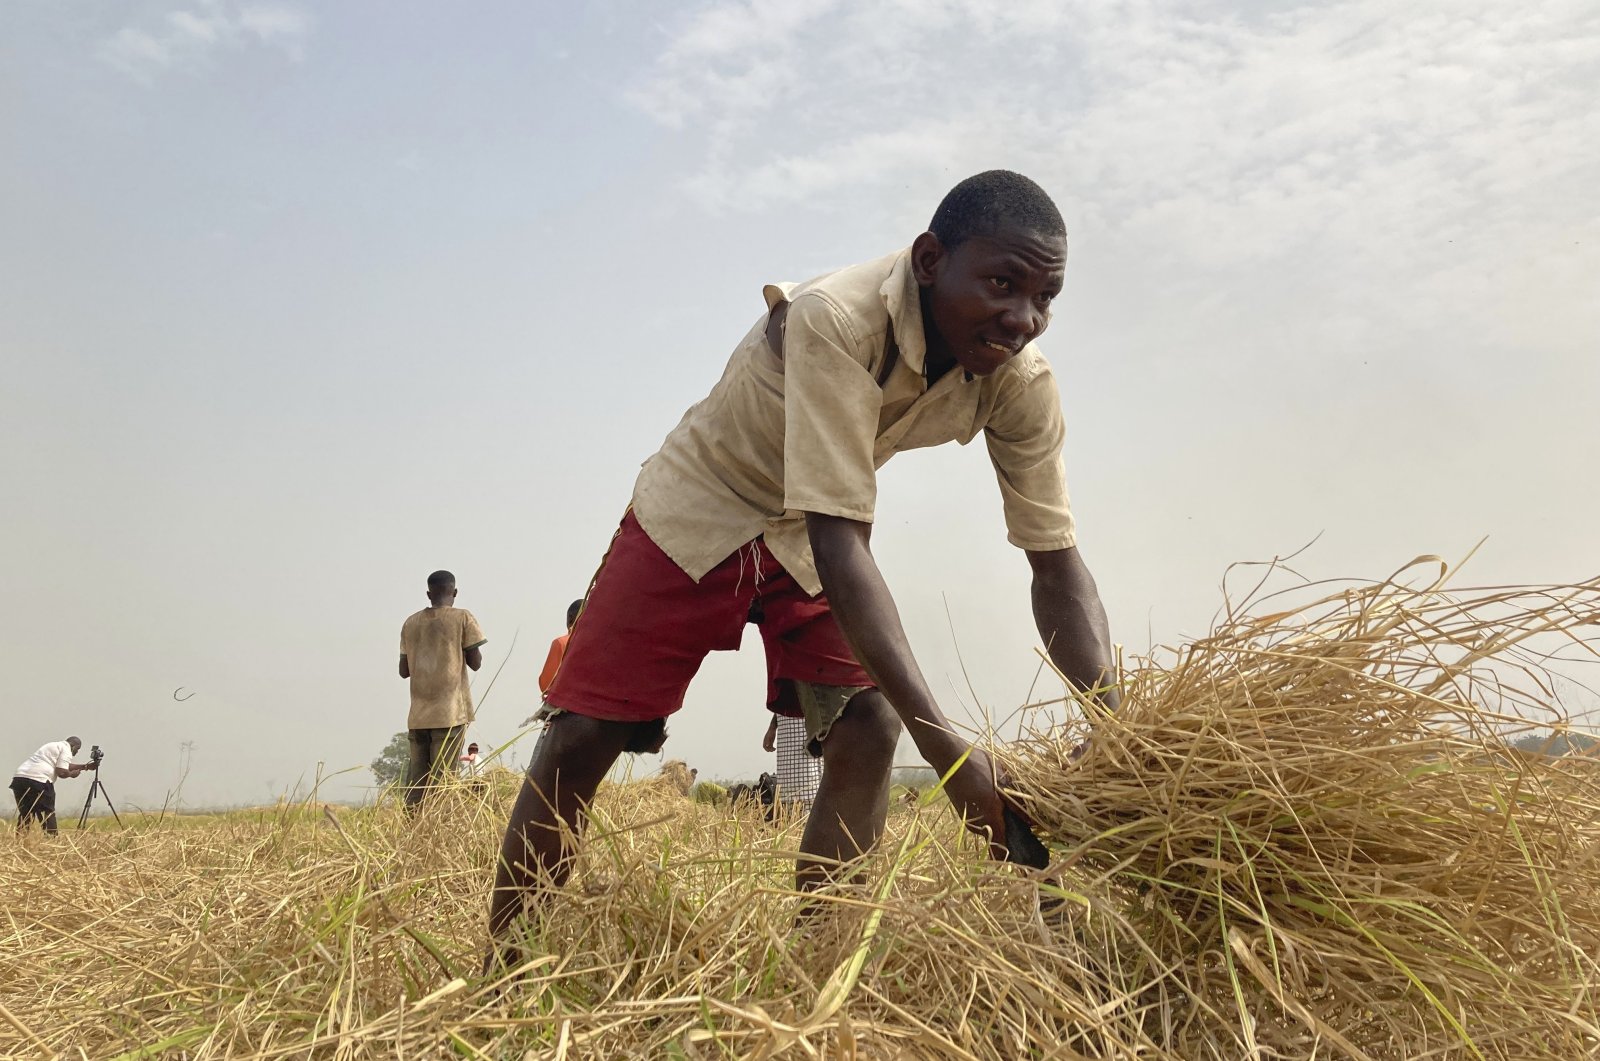 Mohammed Abdul, a farmer who said he &quot;had to start from the beginning&quot; after losing all his farm&#039;s production potential in violent attacks in Nigeria&#039;s north, works on a rice farm in Agatu village on the outskirts of Benue State in northcentral Nigeria, Jan. 5, 2022. (AP Photo)